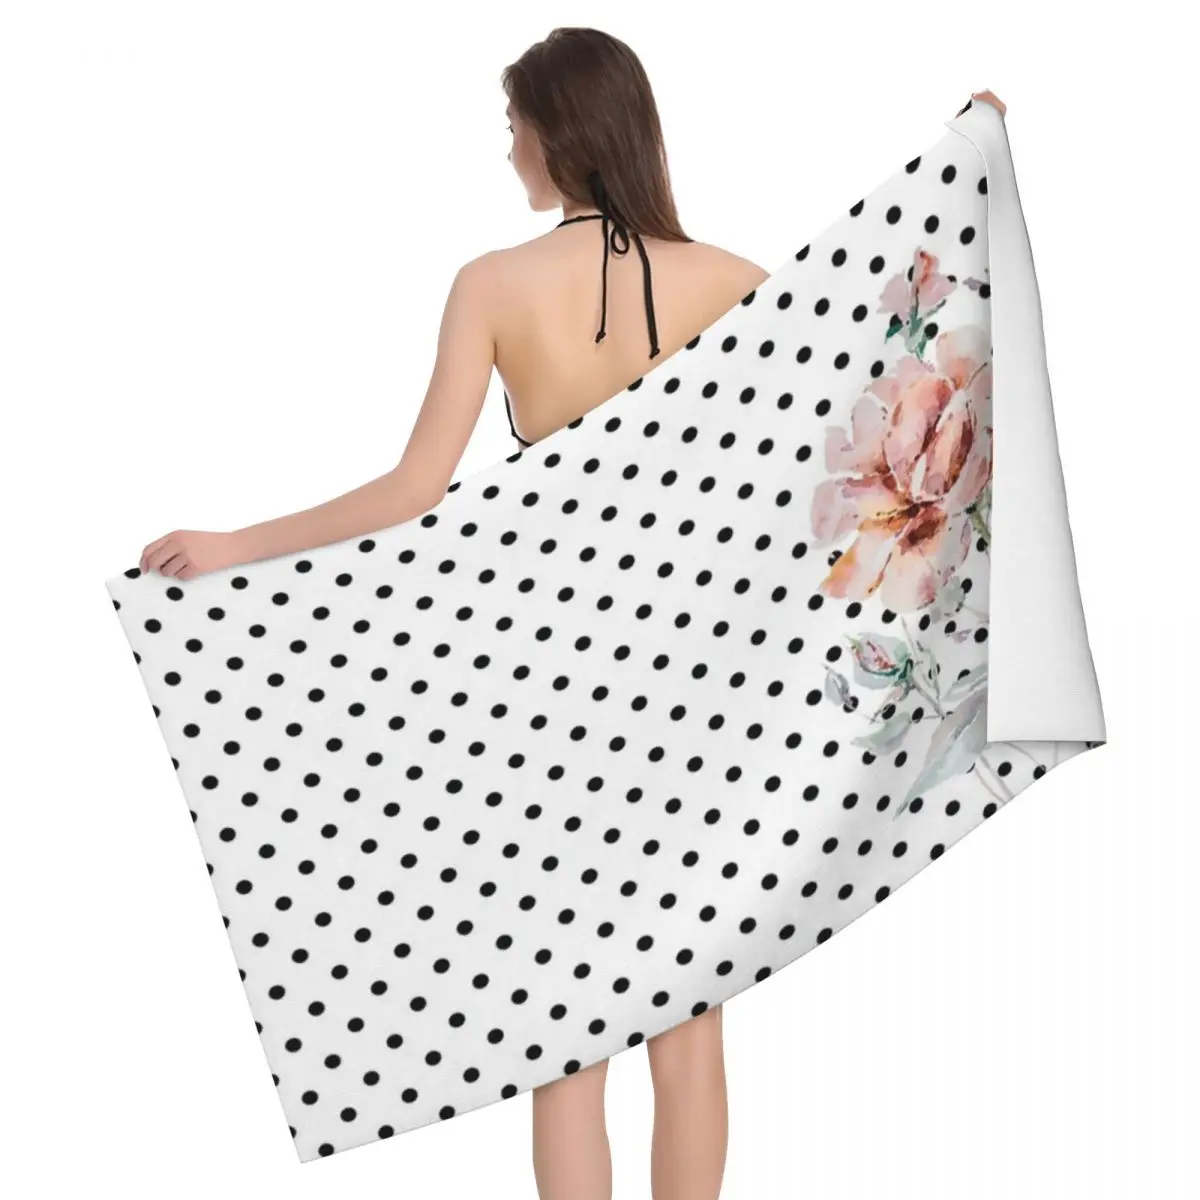 

Vintage Rose On Chic Black And White Polkadots 80x130cm Bath Towel Brightly Printed For Tour Personalised Pattern